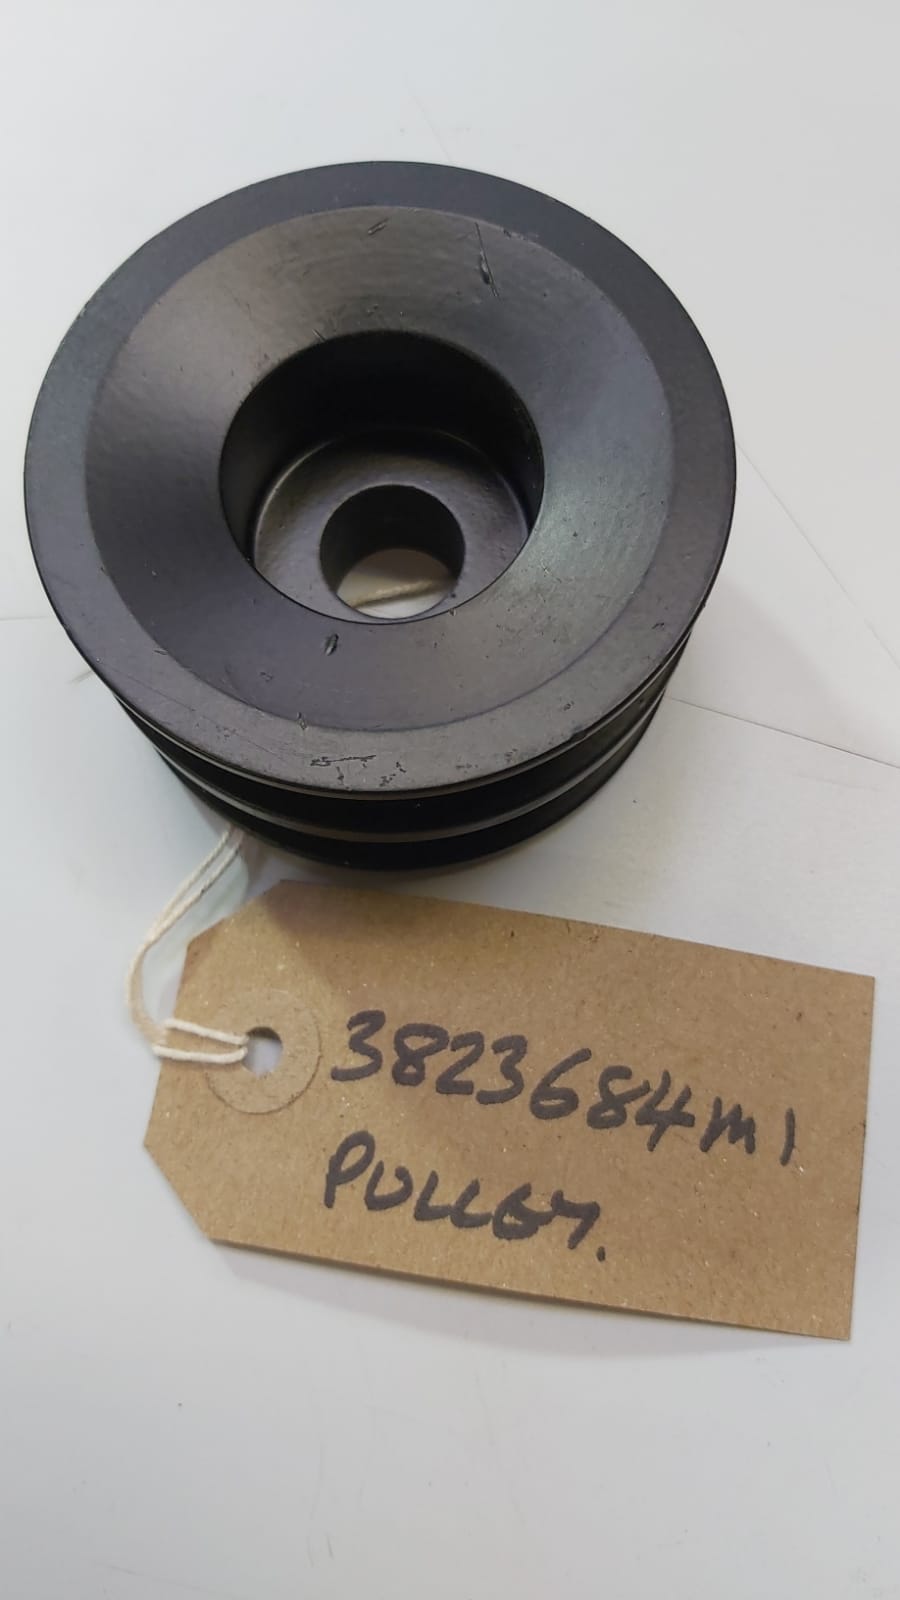 pulley-3823684m1